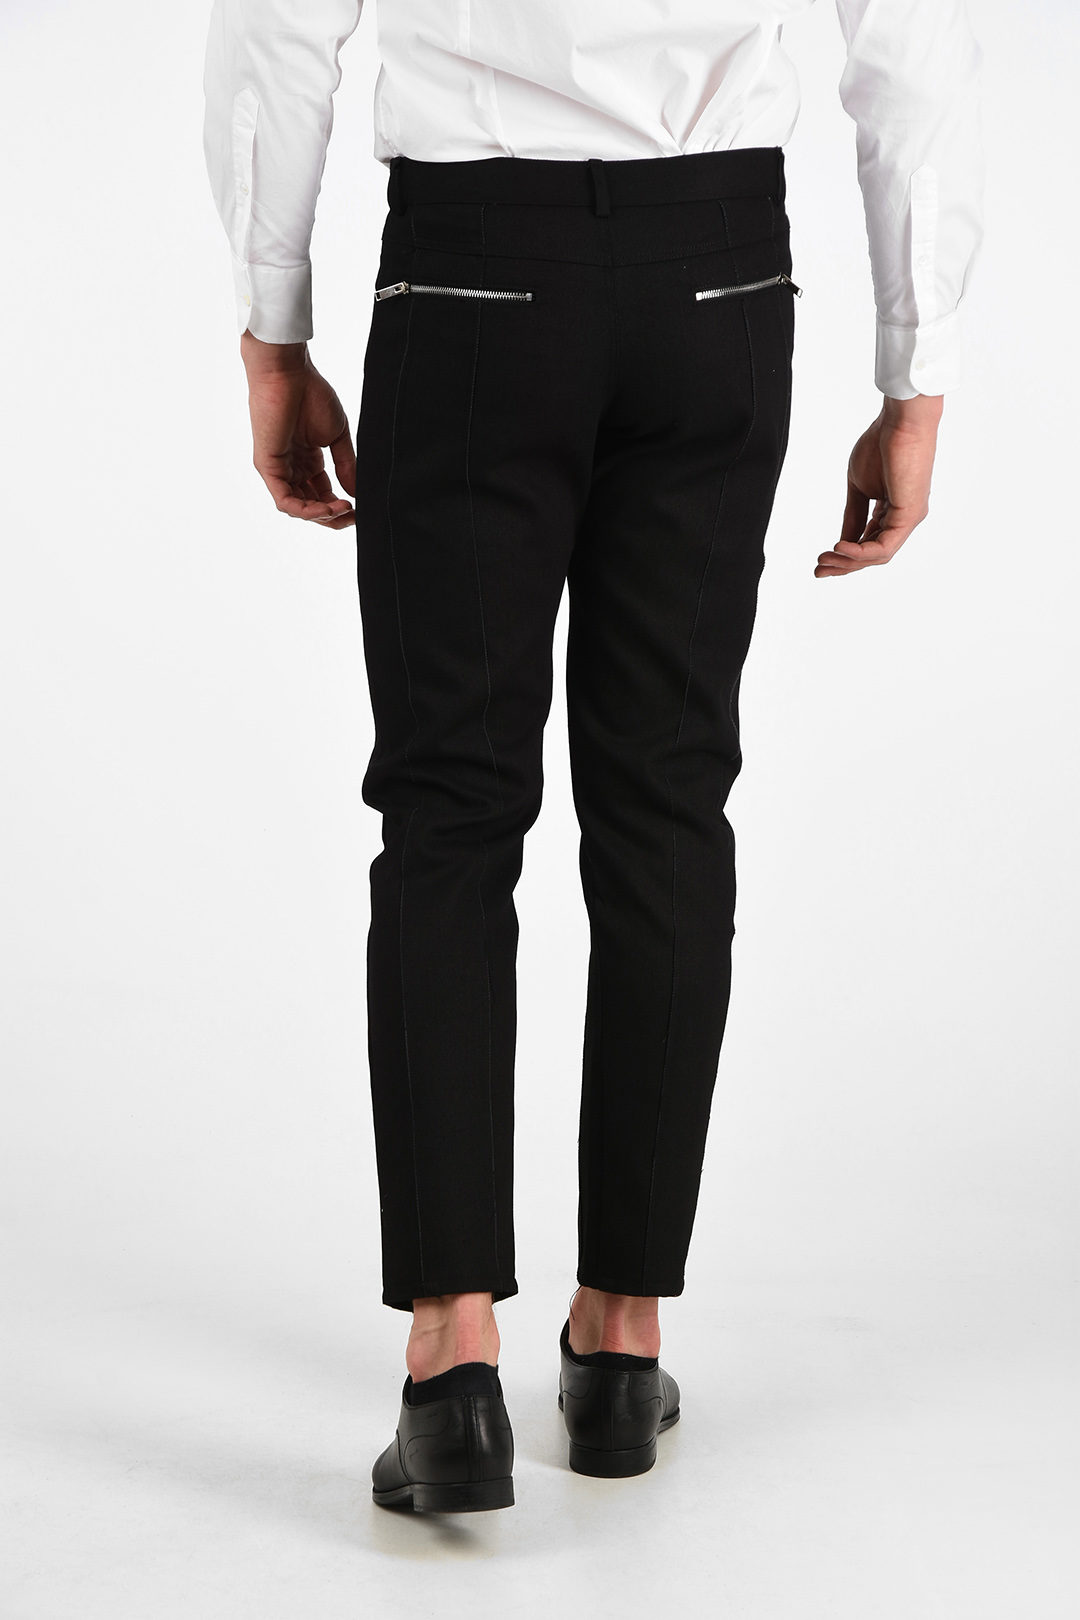 Pencil Fit Trousers For Men - Buy Pencil Fit Trousers For Men online in  India